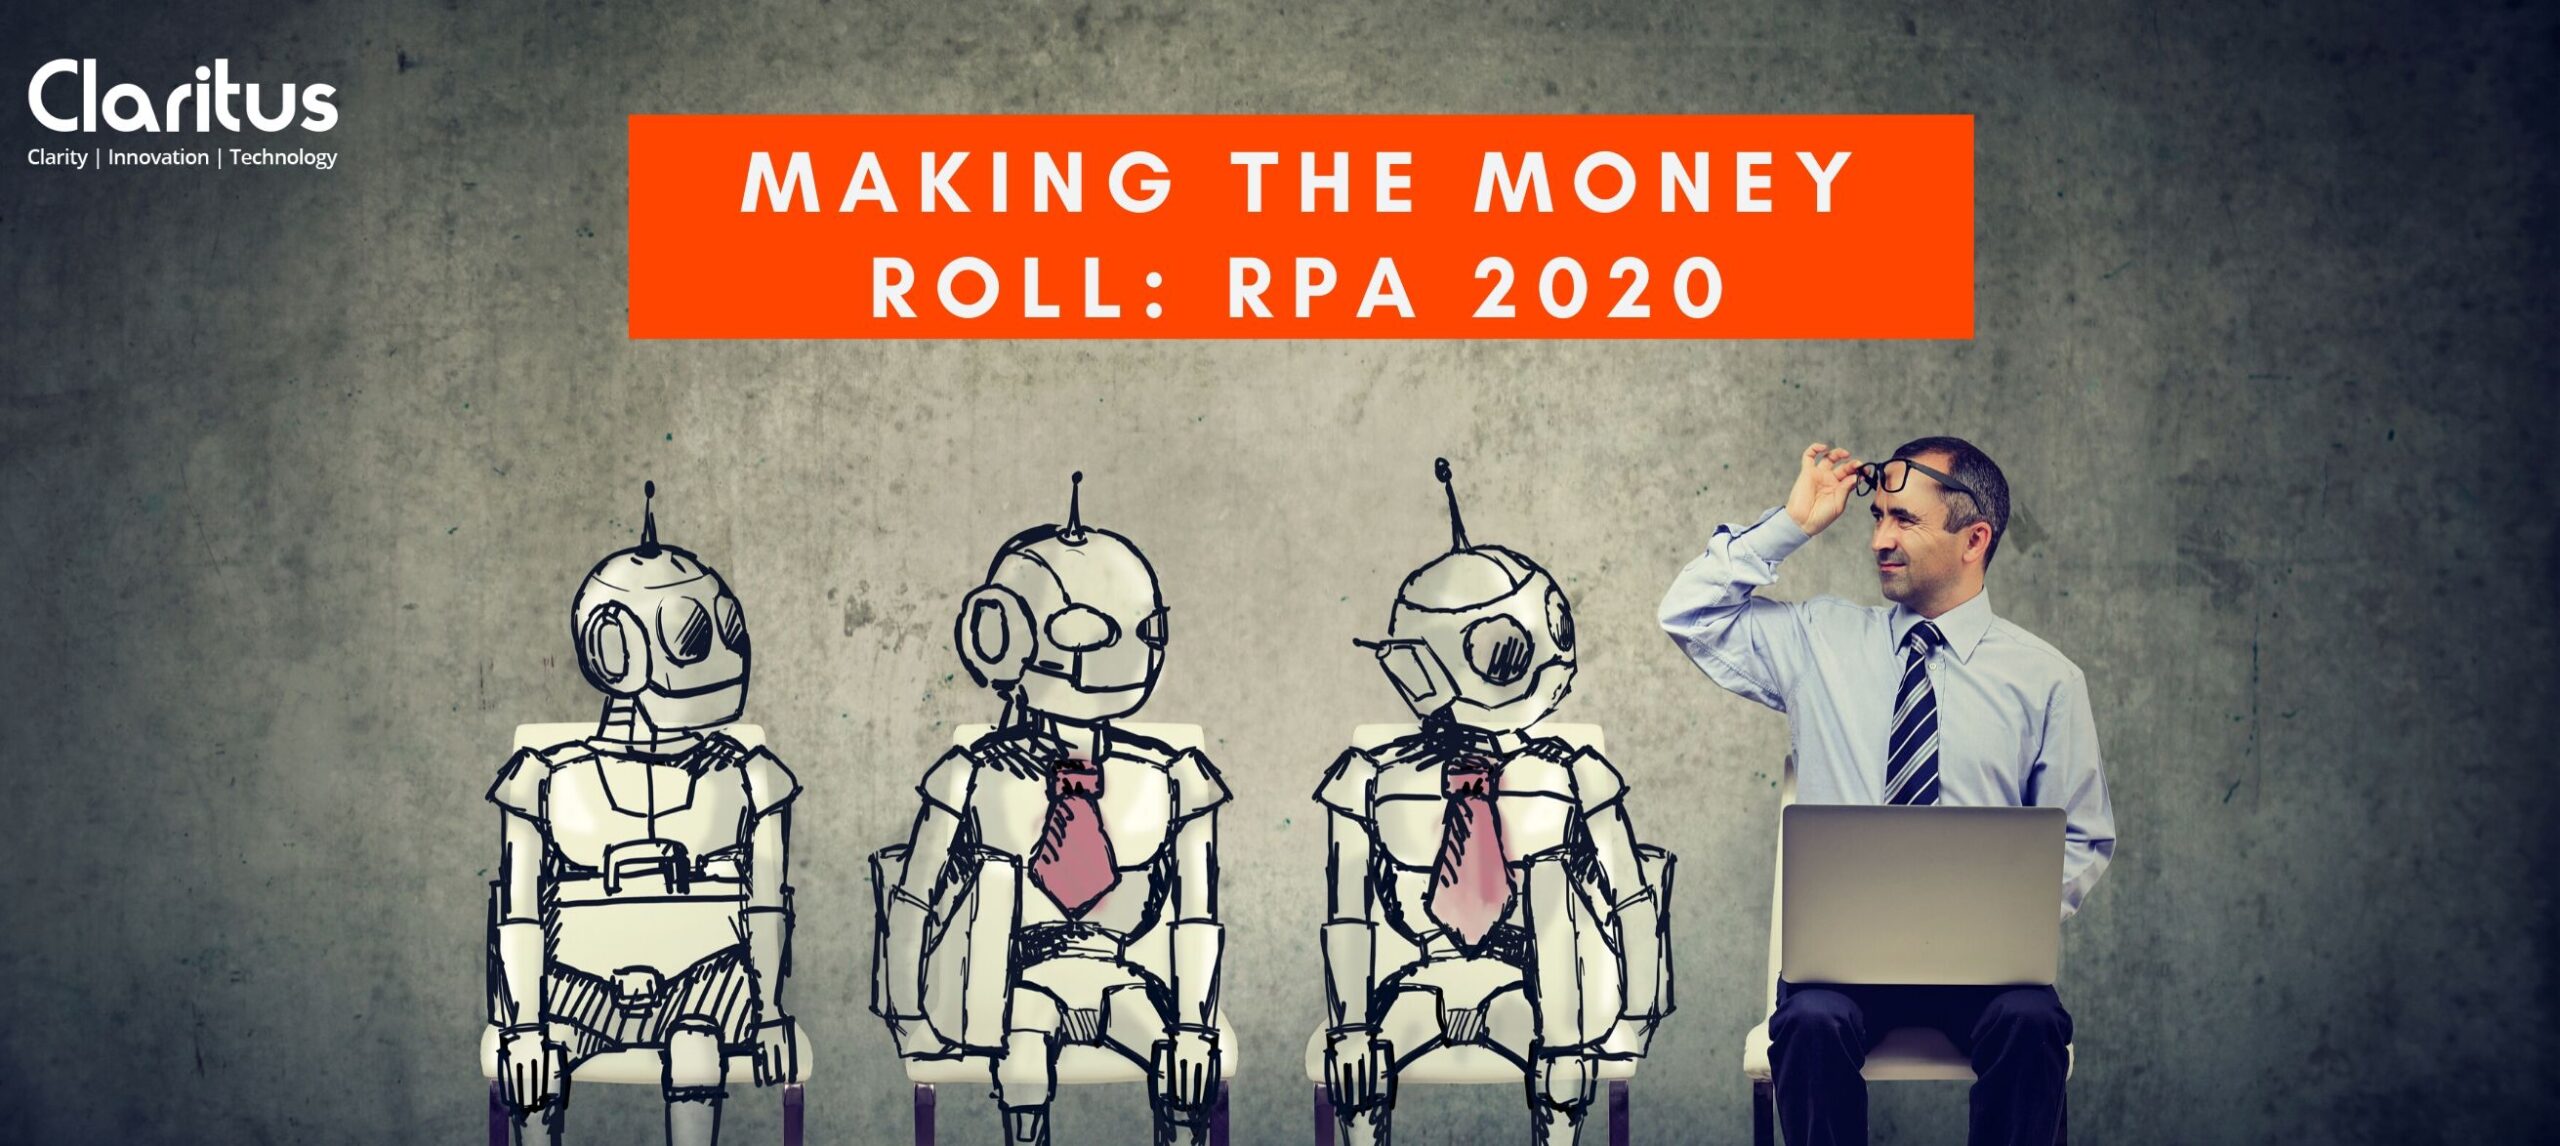 Making the money roll RPA 2020 scaled